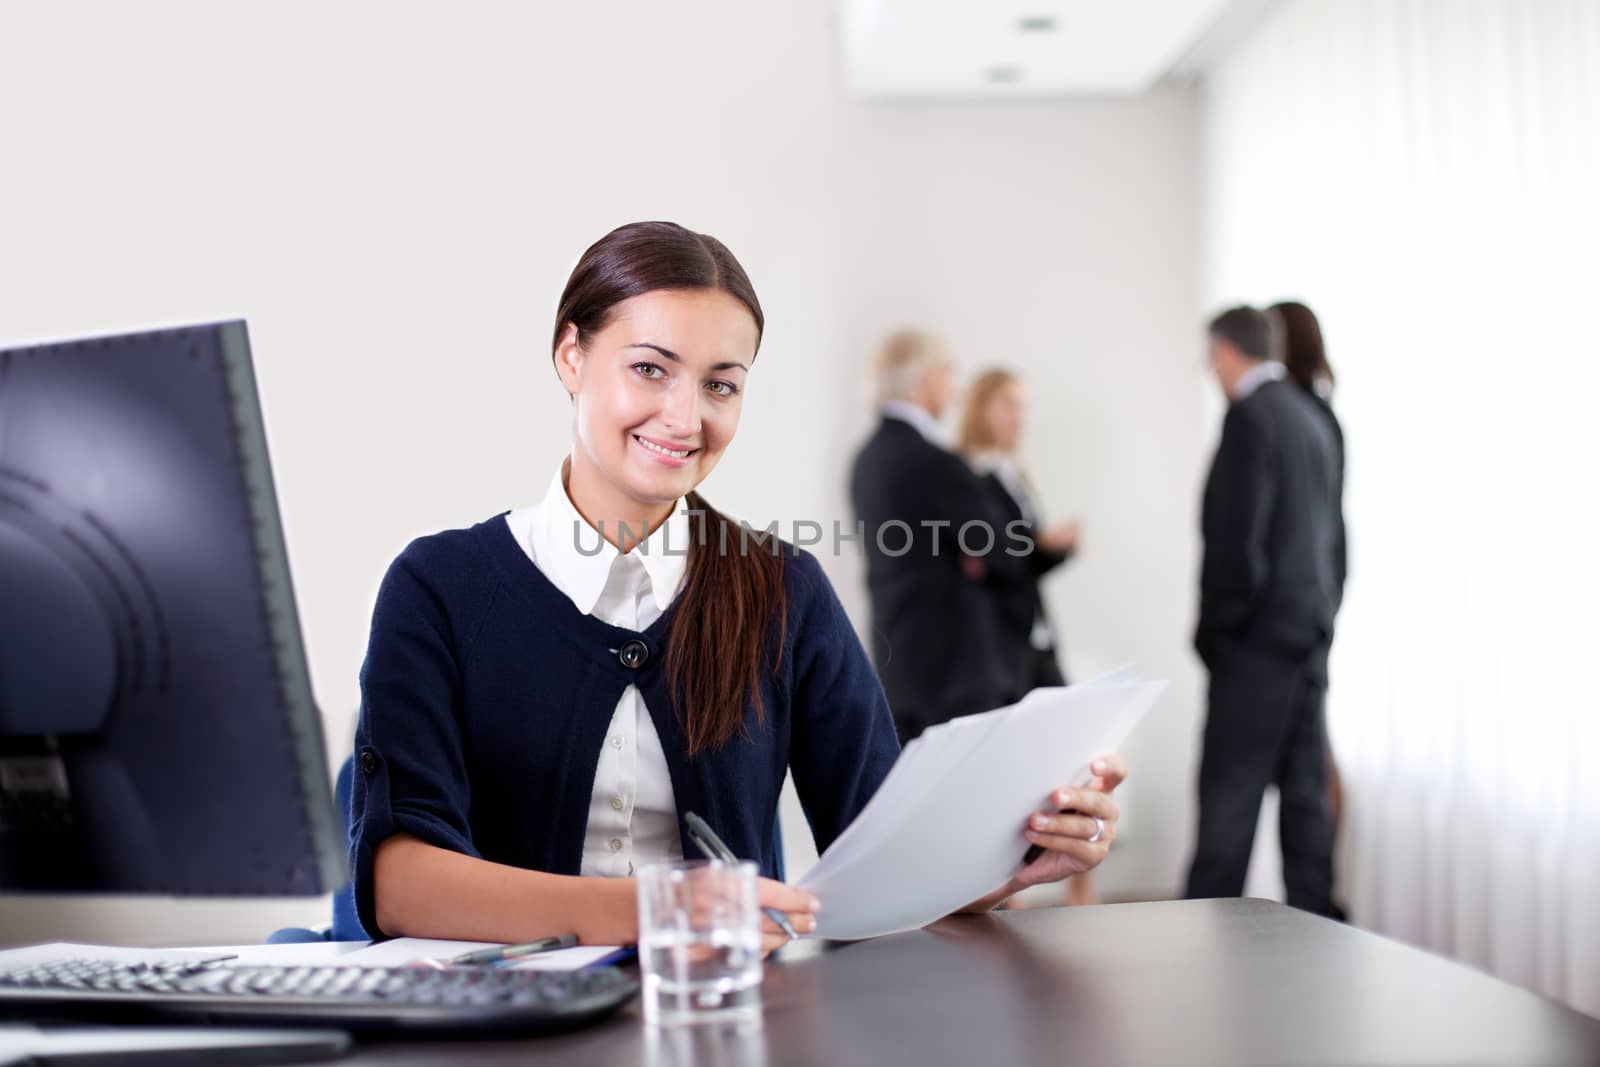 Closeup portrait of happy young business woman holding important office documents and smiling at the camera with colleagues